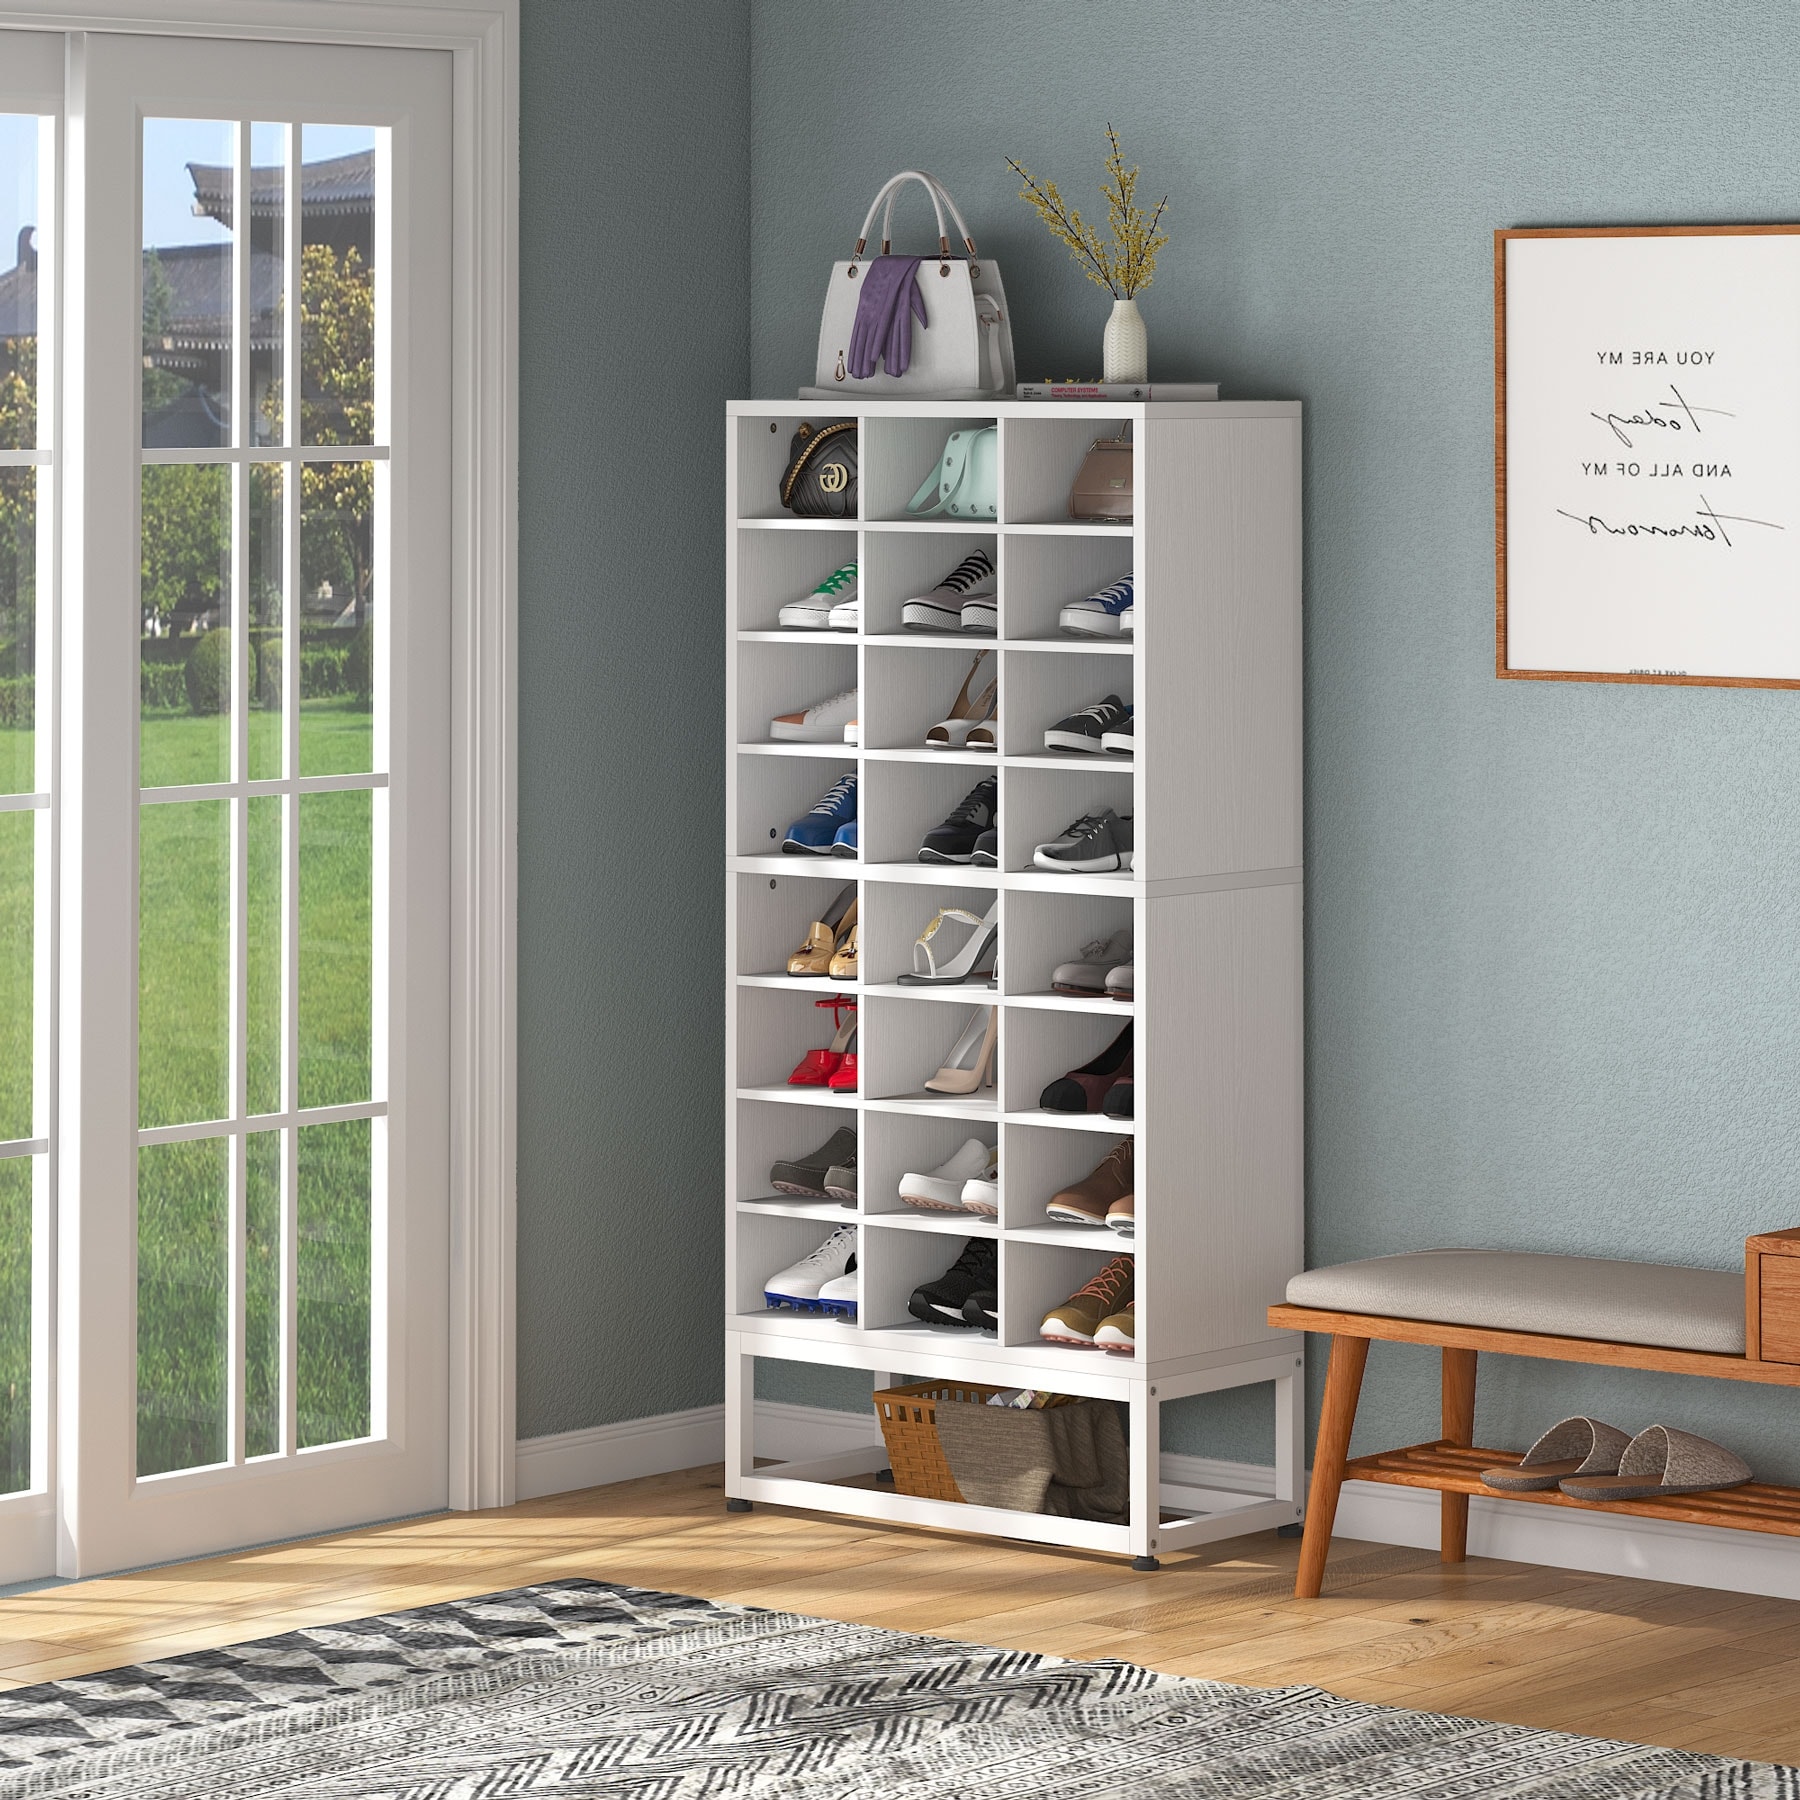 https://ak1.ostkcdn.com/images/products/is/images/direct/2530a9057971b0a0bc1797e158f7068cad47b232/24-Pair-Shoe-Storage-Cabinet-Adjustable-Shoe-Rack-Organizers%2C-8-Tier-White-Cube-Storage-Bookcase.jpg